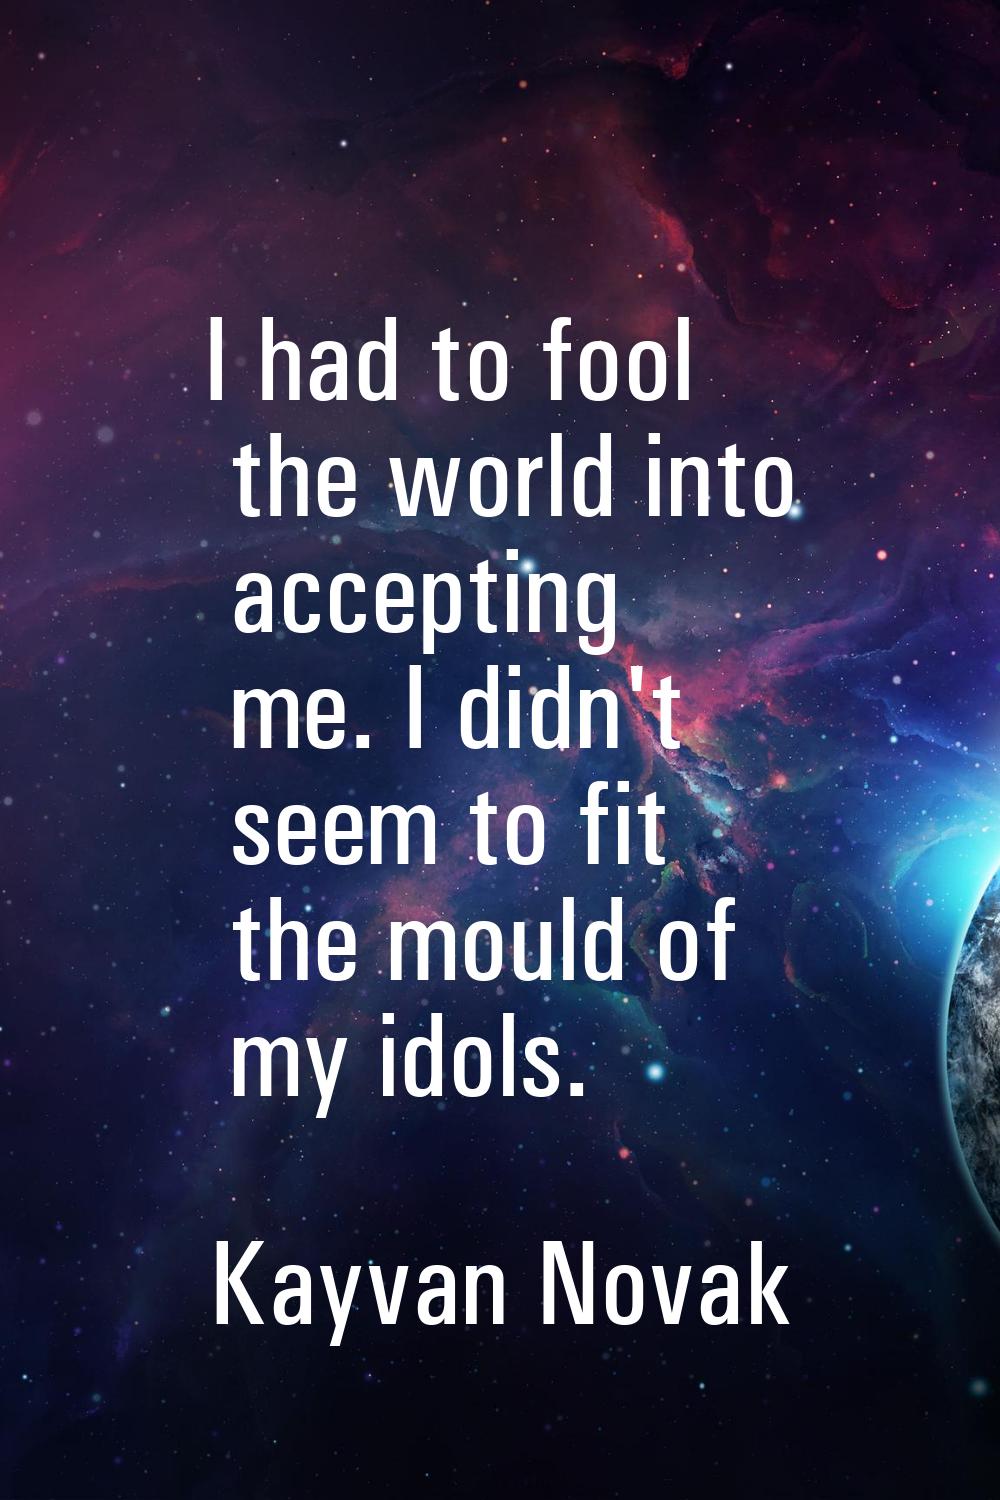 I had to fool the world into accepting me. I didn't seem to fit the mould of my idols.